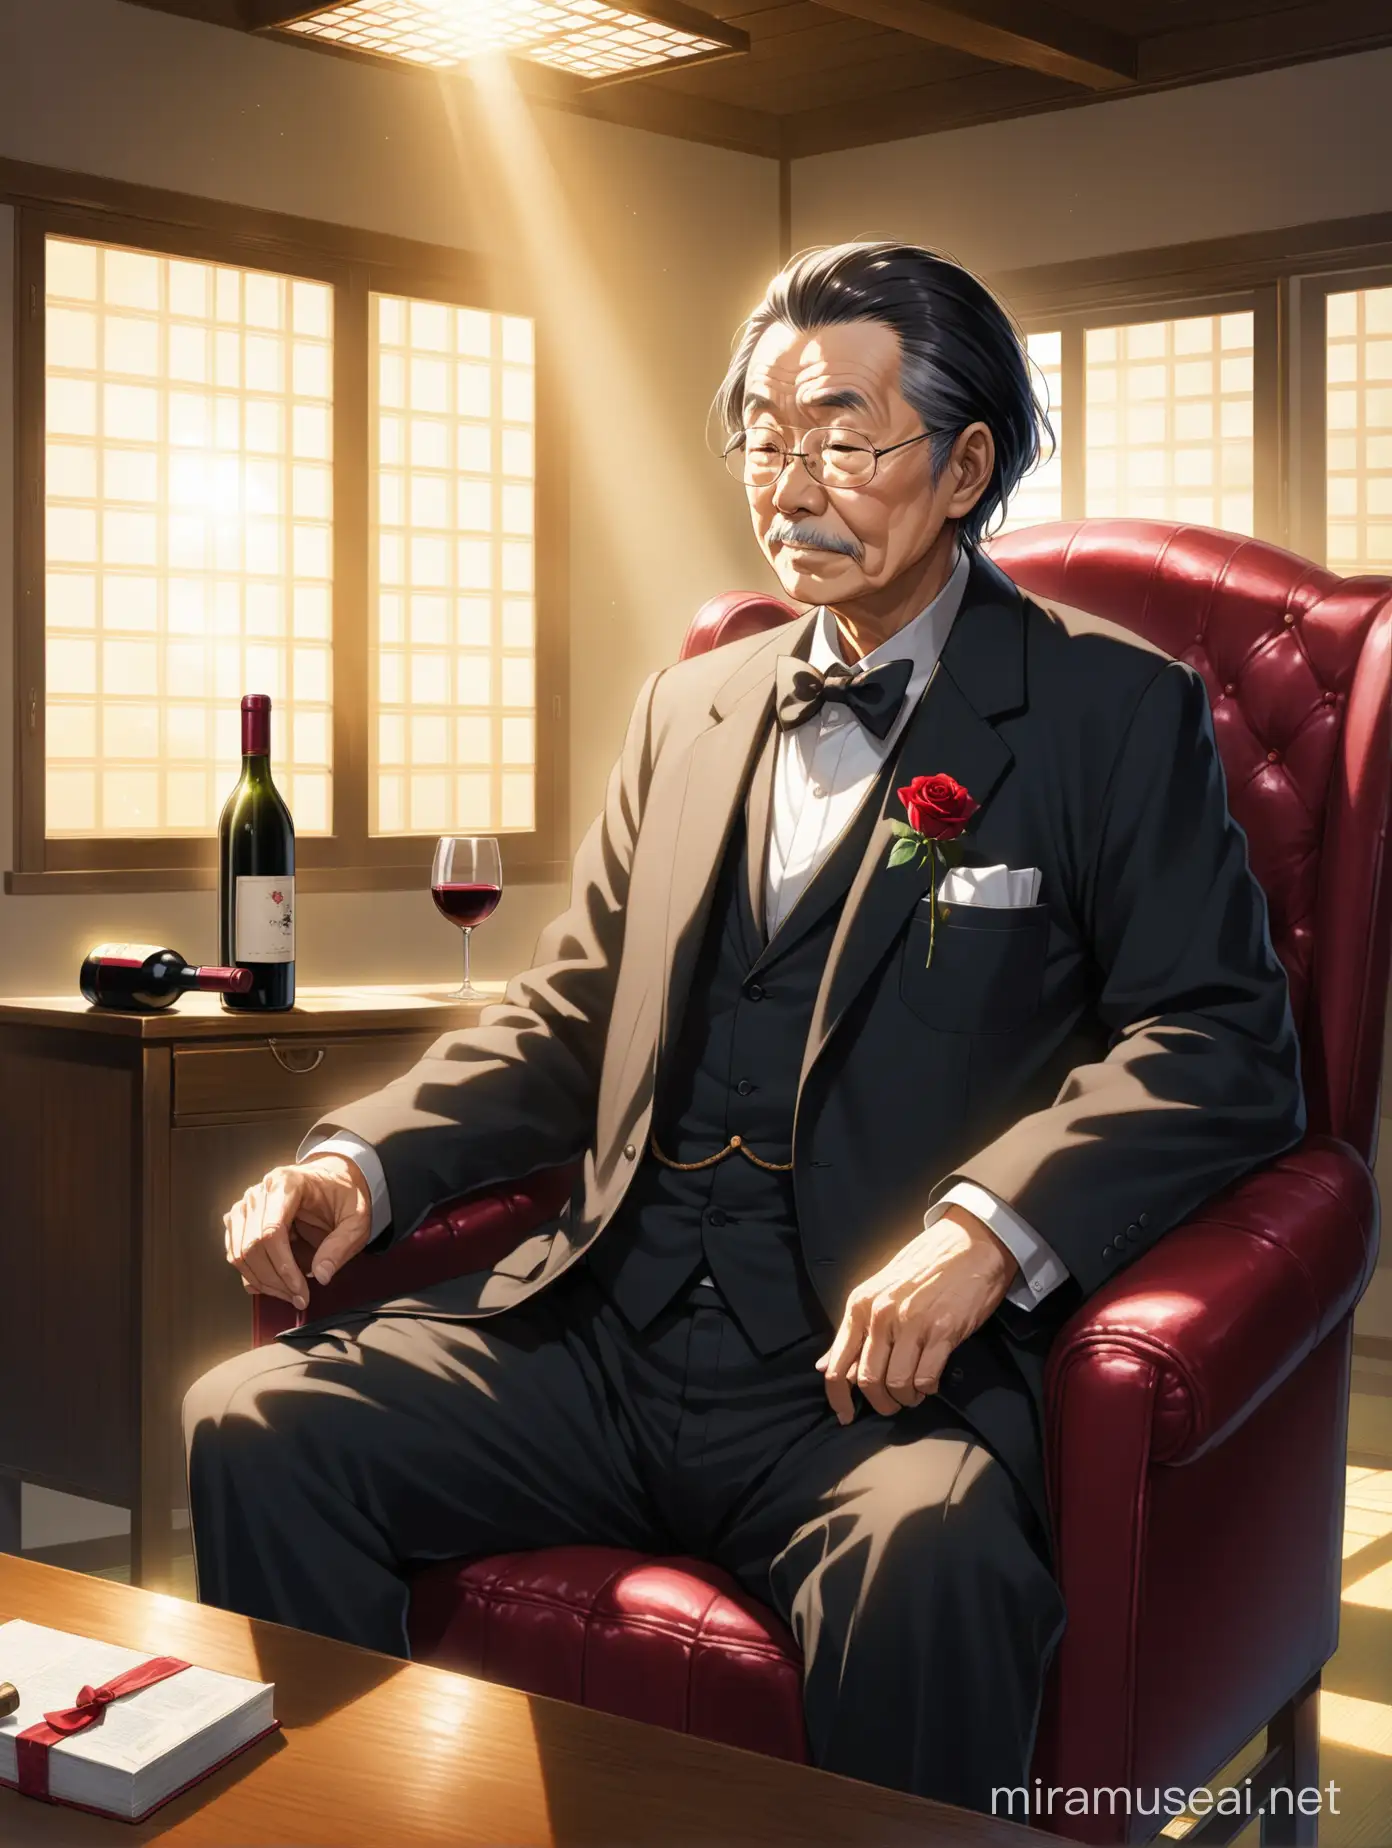 An old Japanese man who appears wise, with black hair, wearing a white shirt, a black bow tie in the shape of a butterfly, and a black suit. He puts a red rose in his jacket pocket. He sits on a large leather chair, and in front of him is a desk with wine bottle, and in the background windows appear, sending sunlight into the room